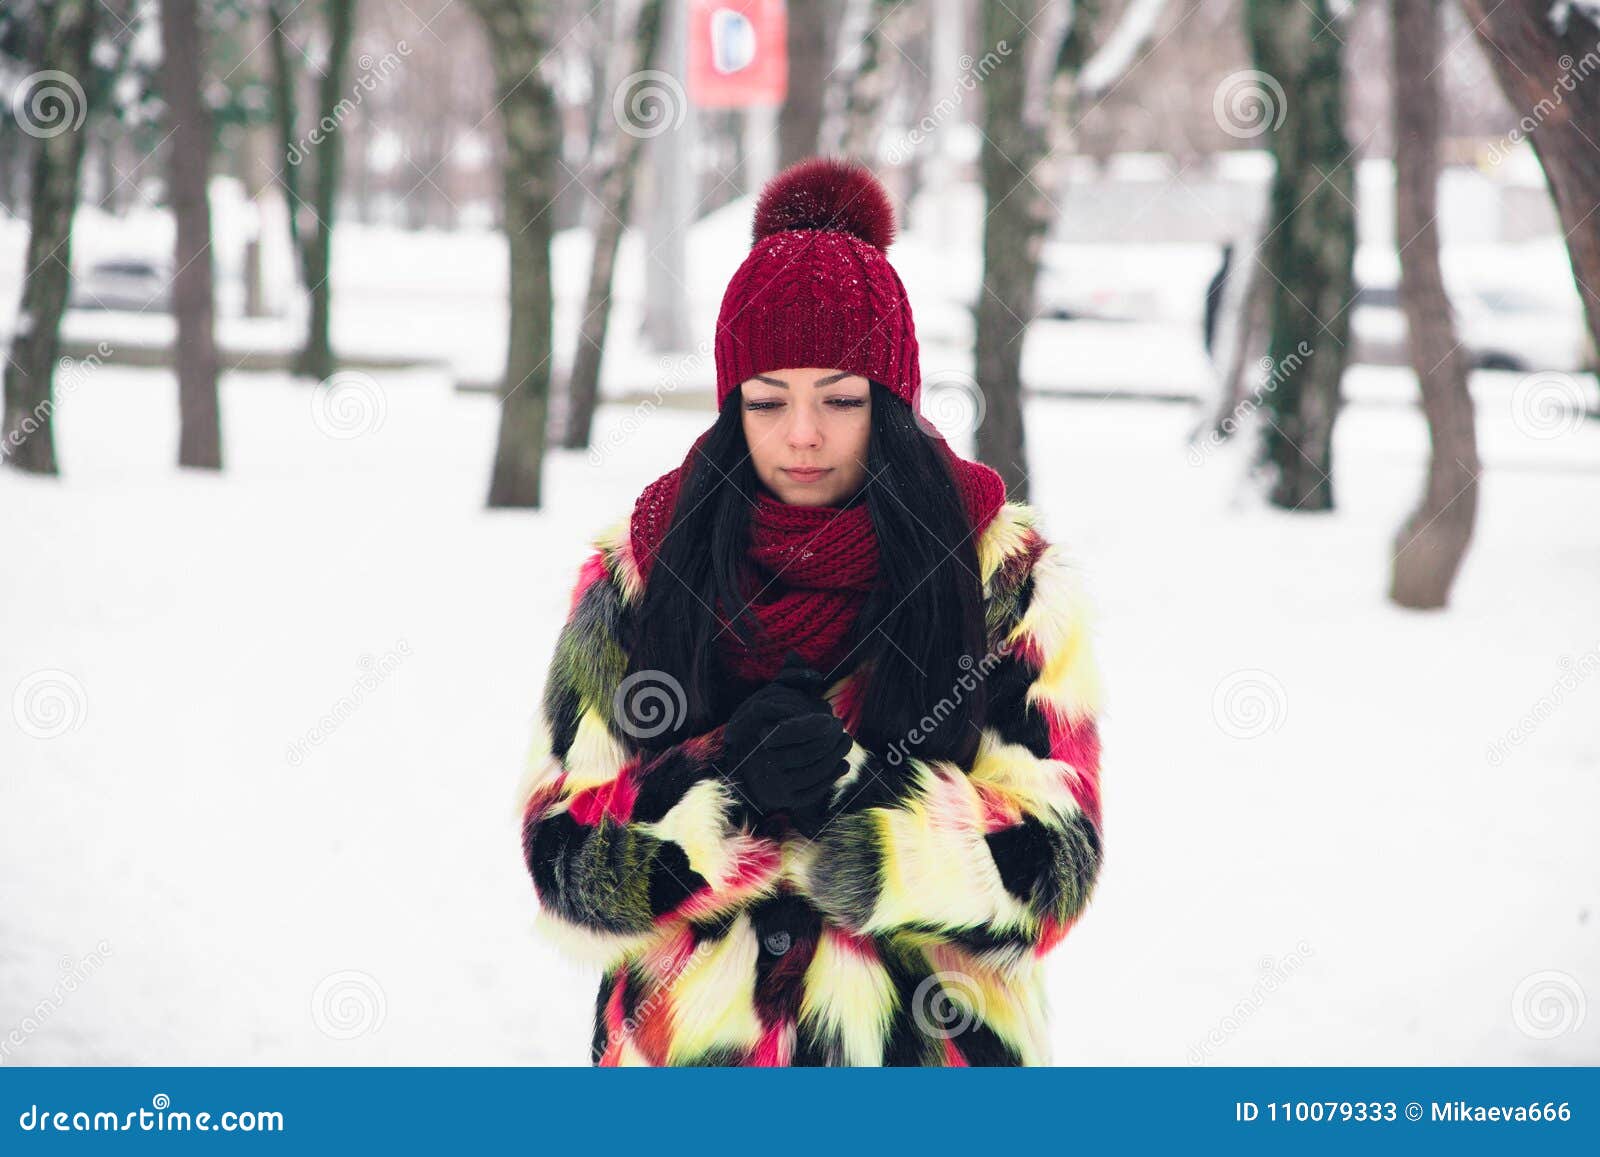 Young Woman in Multi-colored Fur Coat Stock Image - Image of cute ...